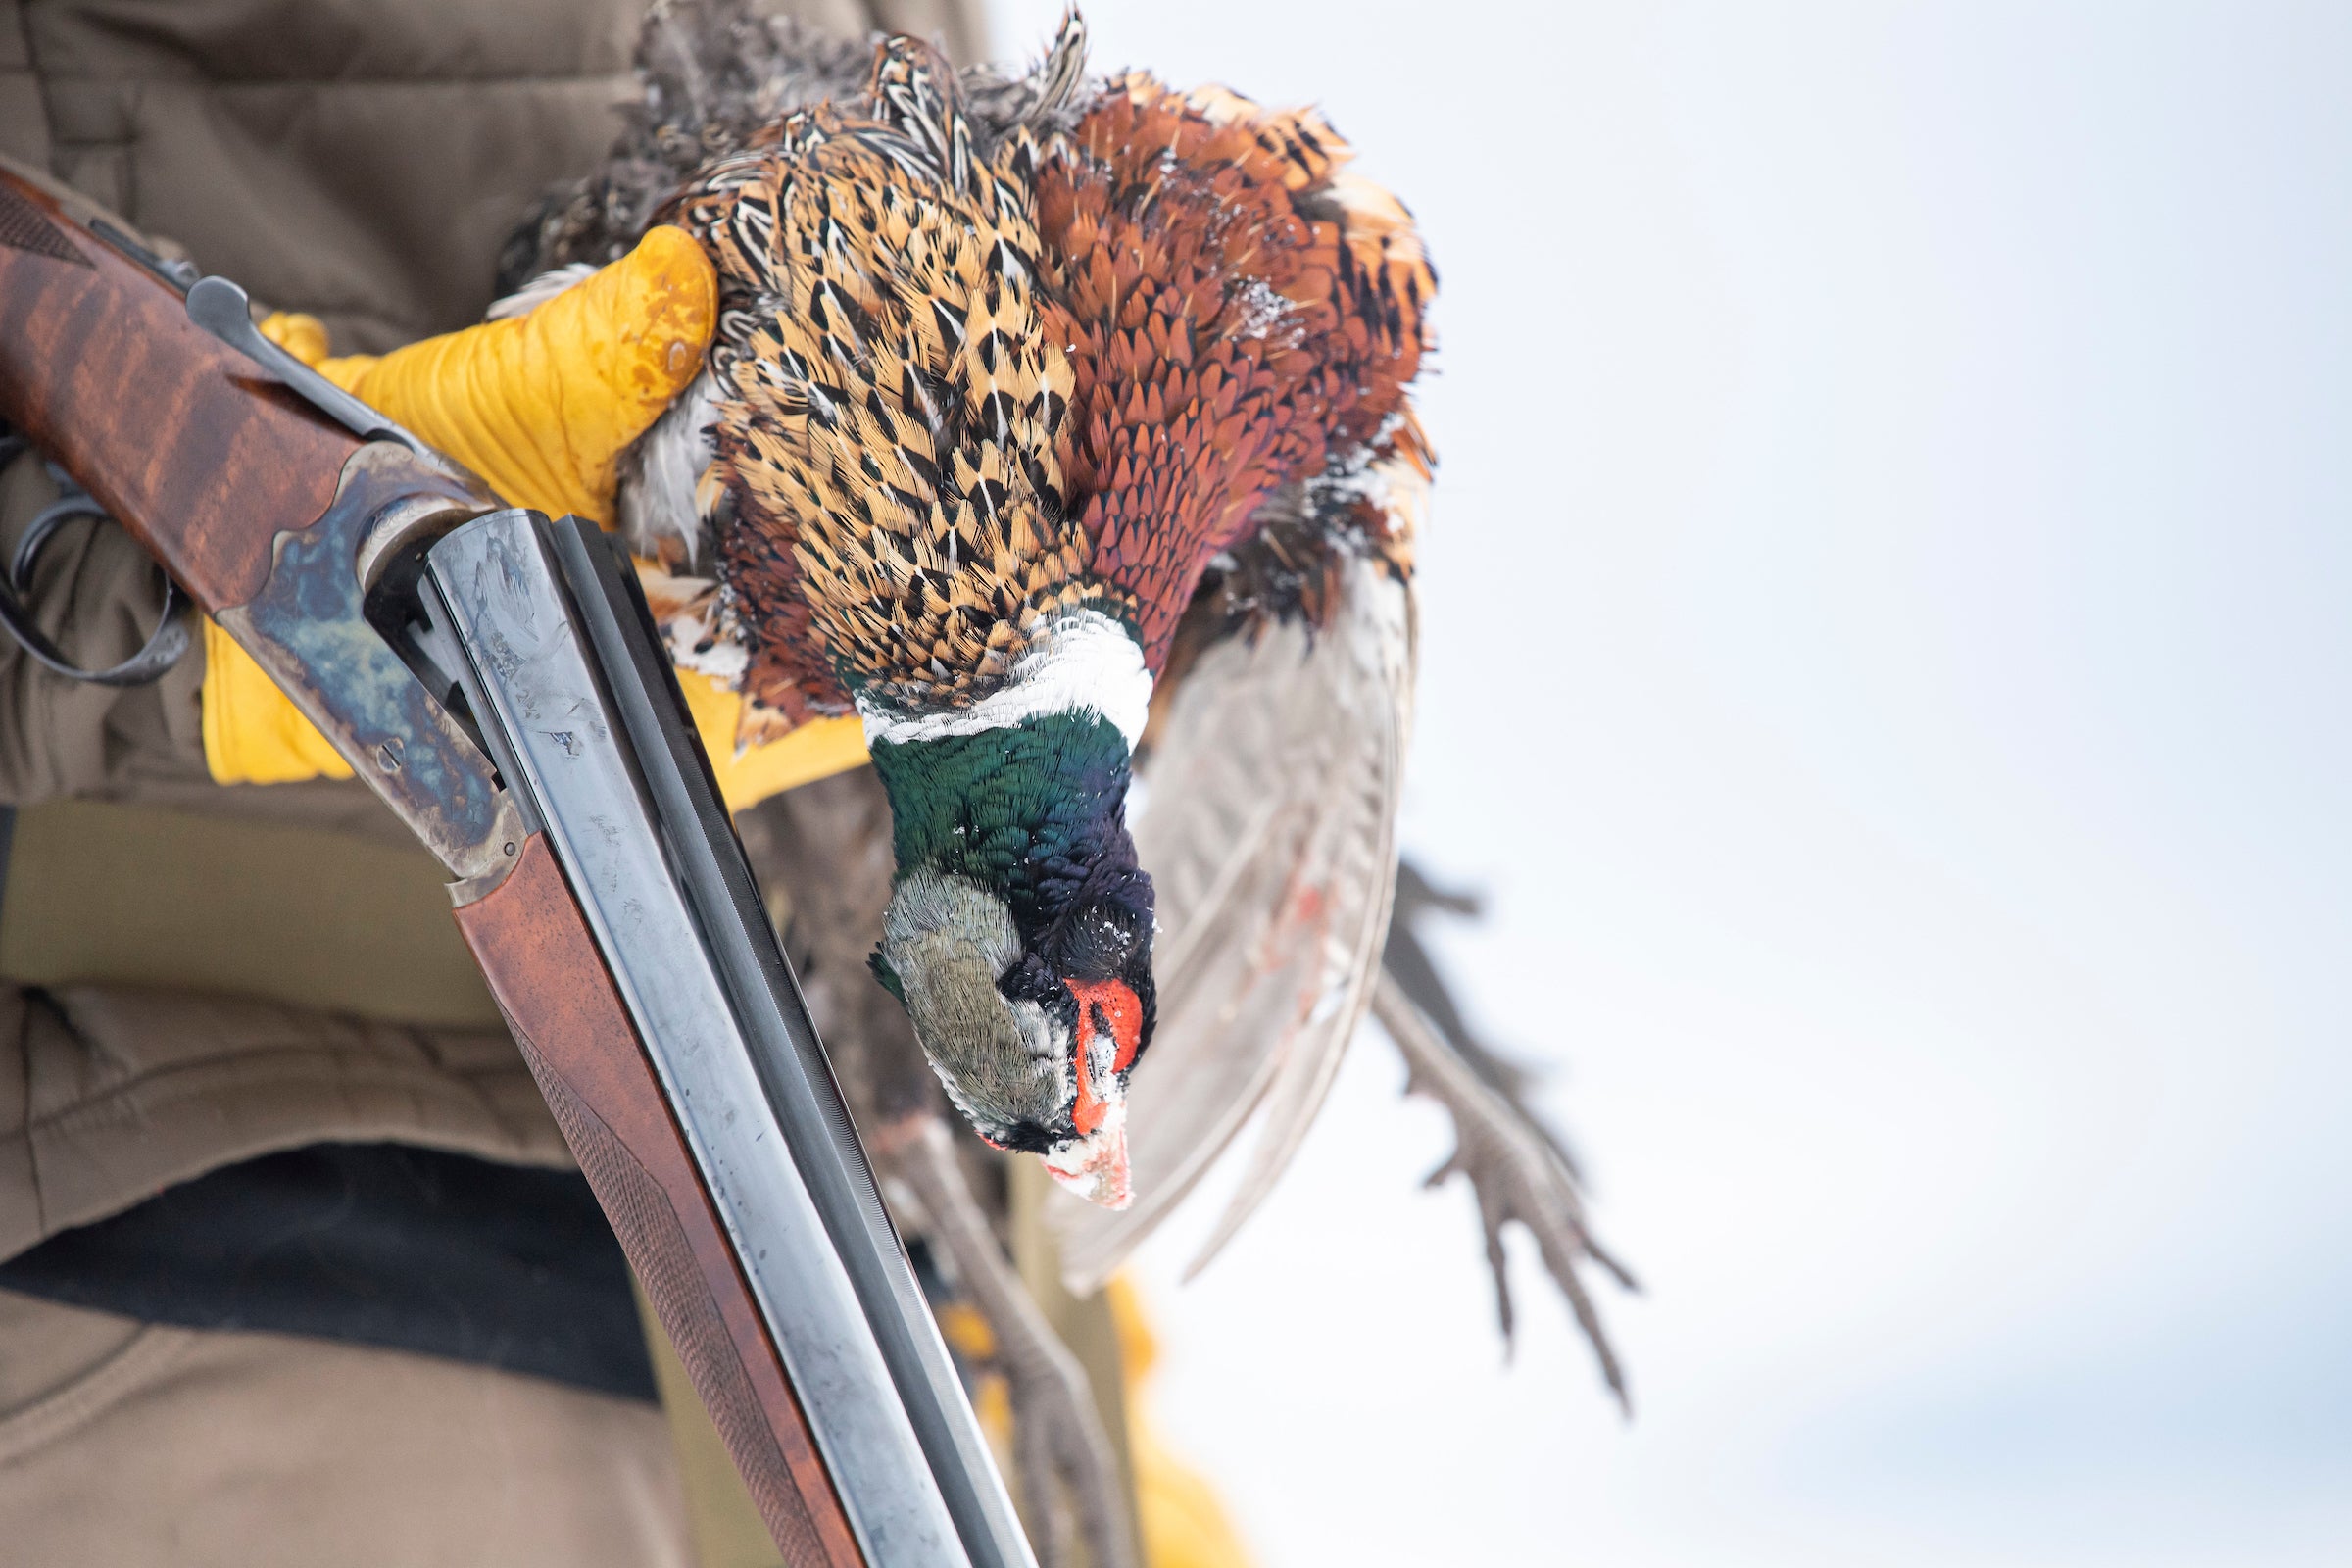 Will Russia’s Invasion of Ukraine Mean Fewer Pheasants This Fall?